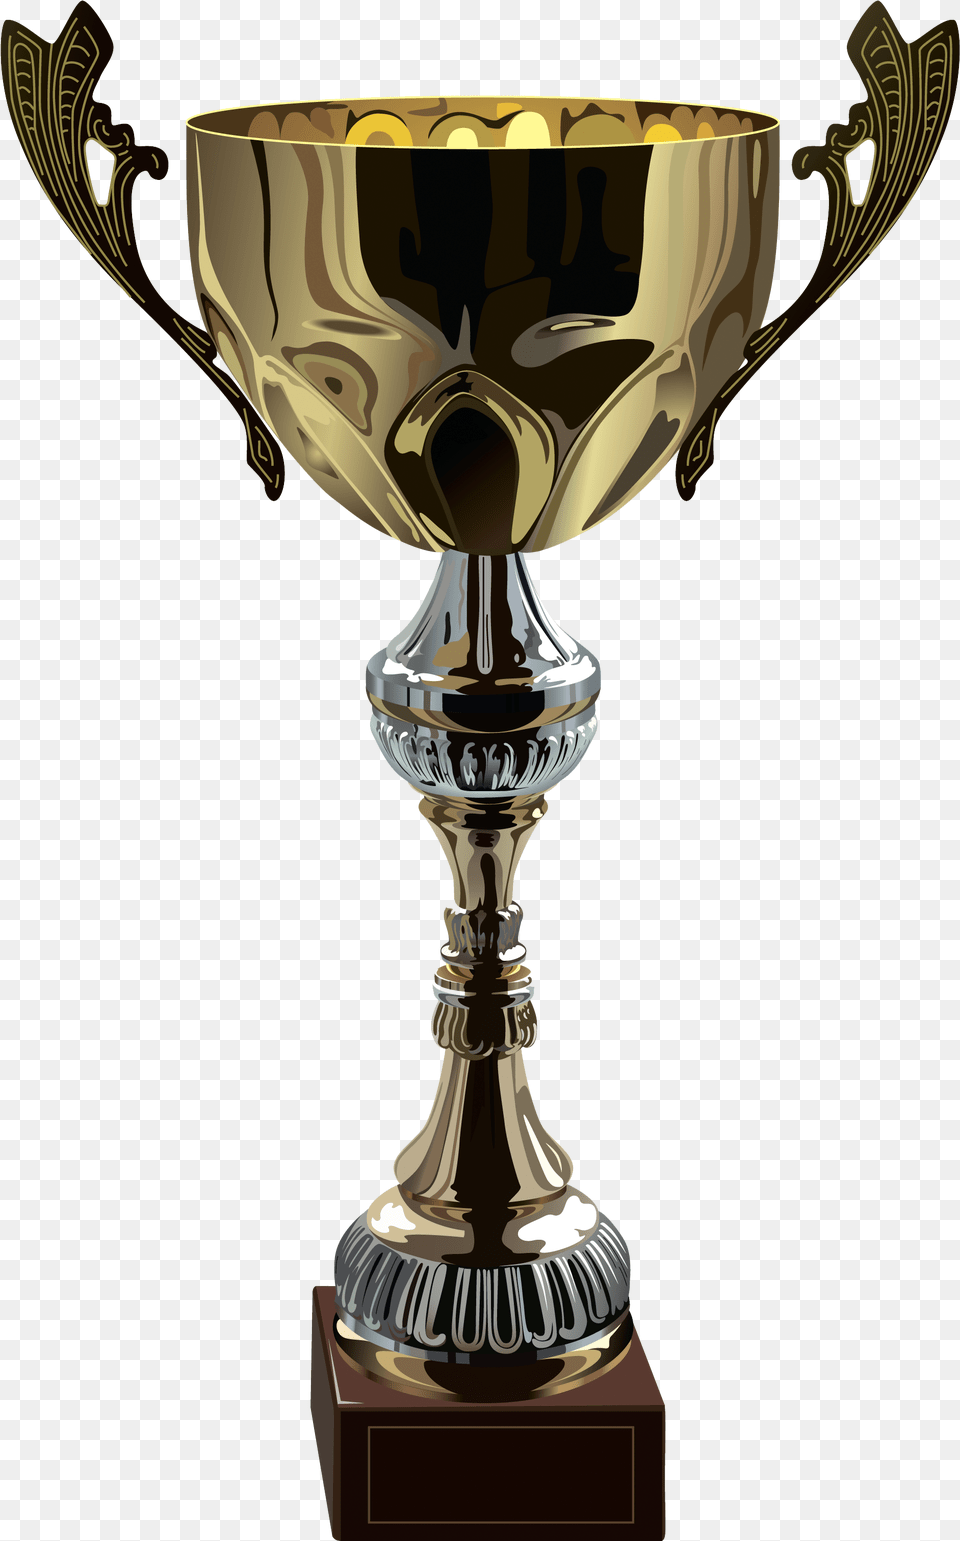 Trophy Golden Medal Cup Download Clipart World Cup Cricket, Smoke Pipe Free Transparent Png